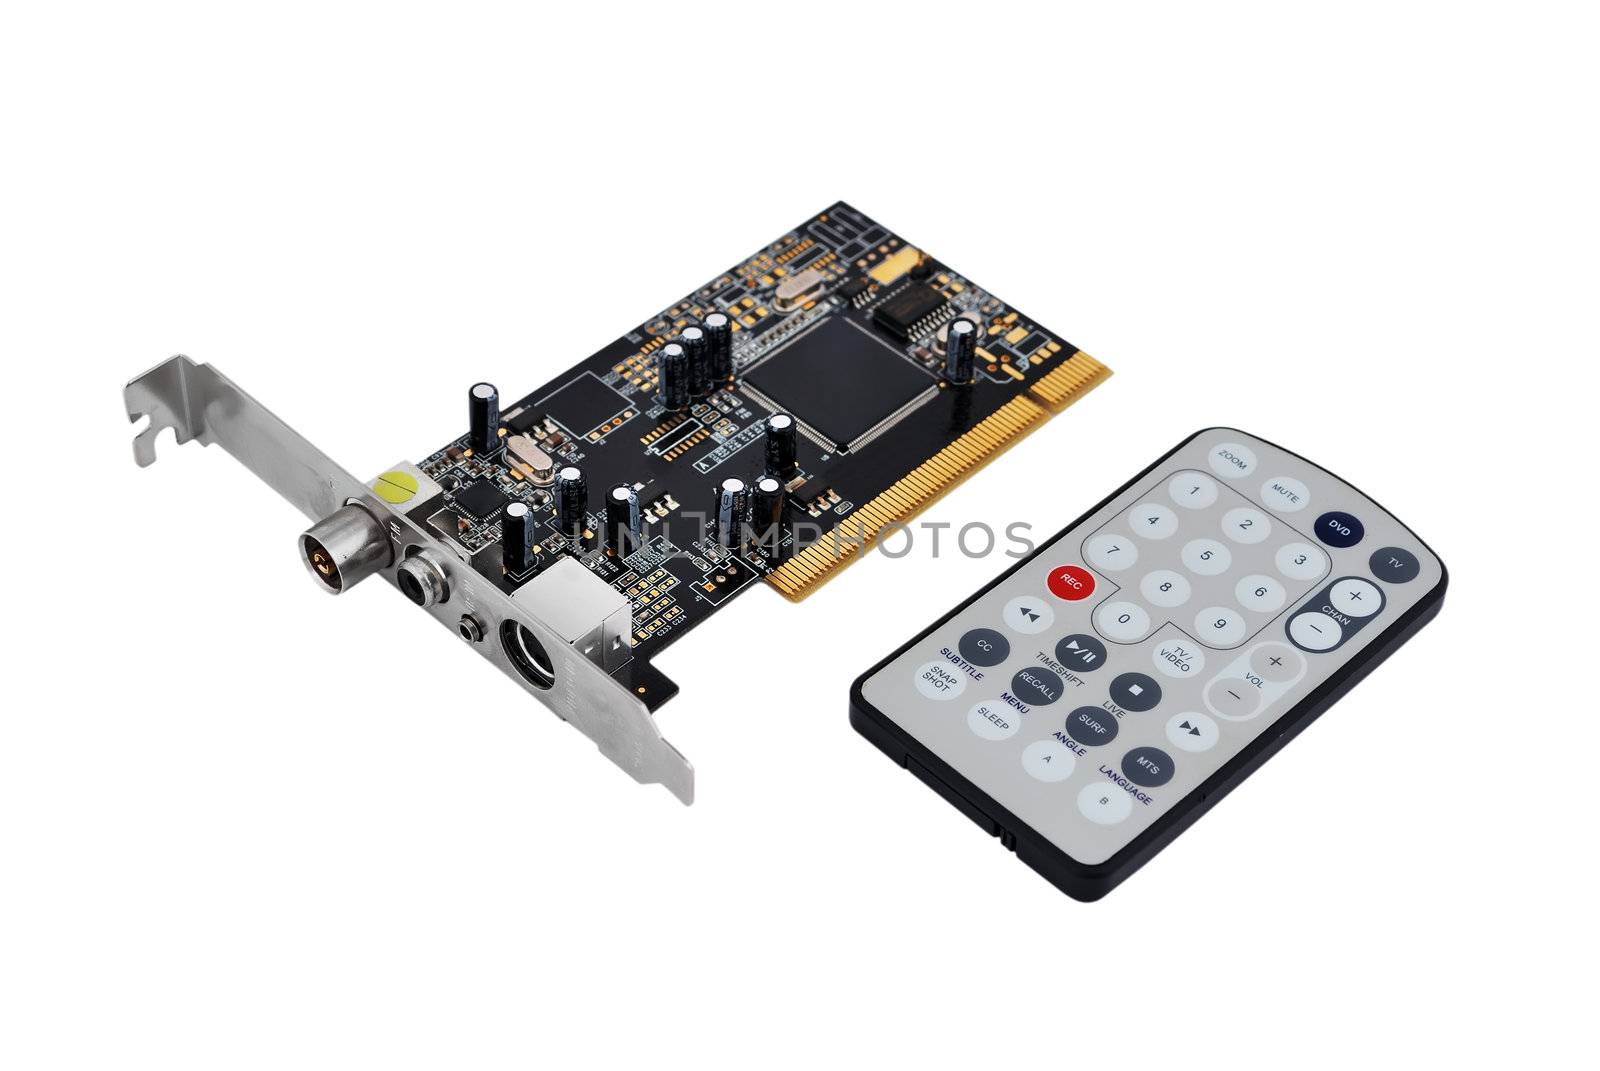 TV tuner card and remote control on a white background